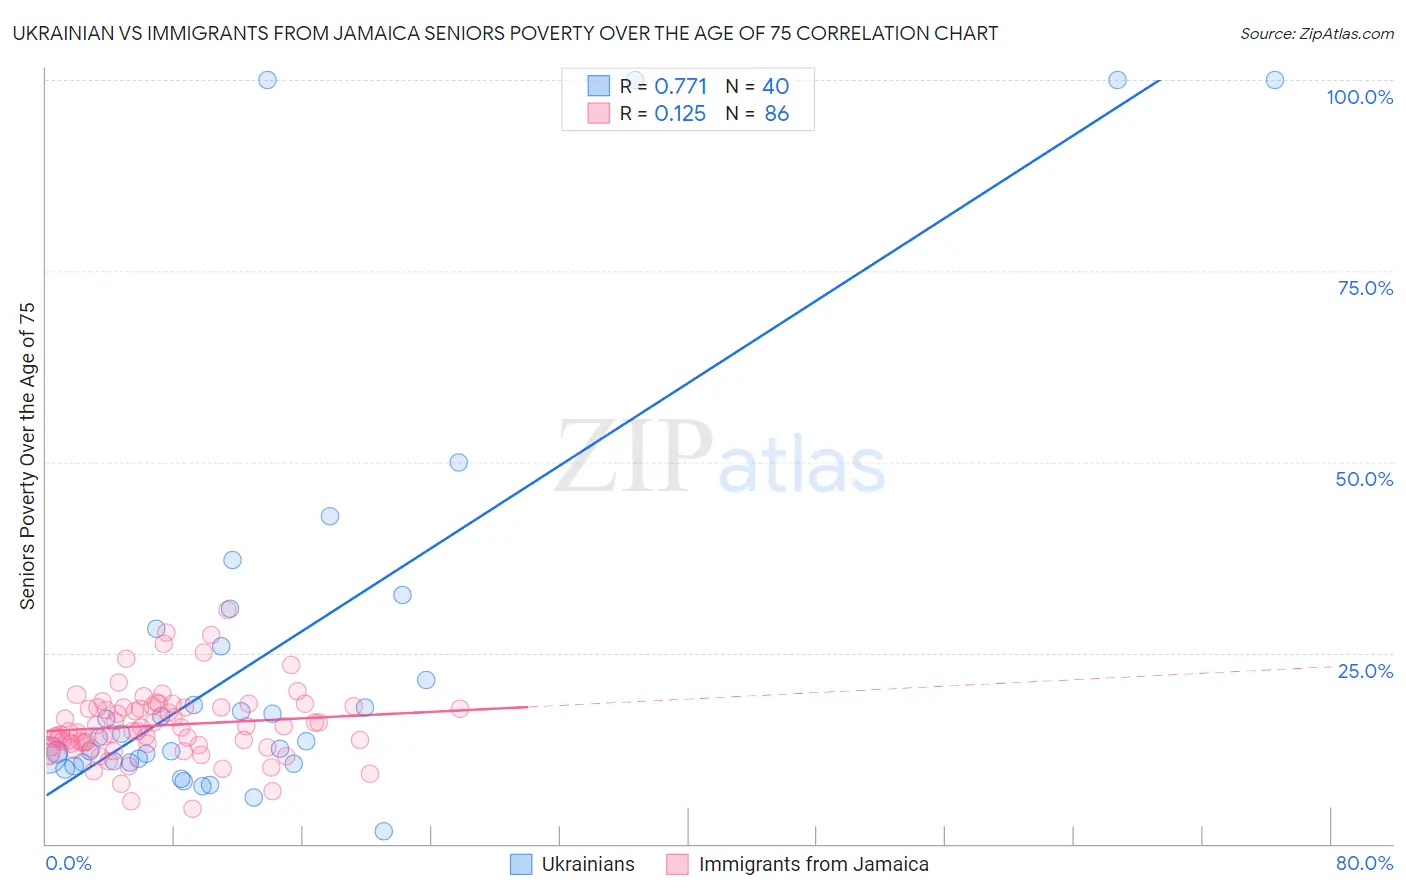 Ukrainian vs Immigrants from Jamaica Seniors Poverty Over the Age of 75